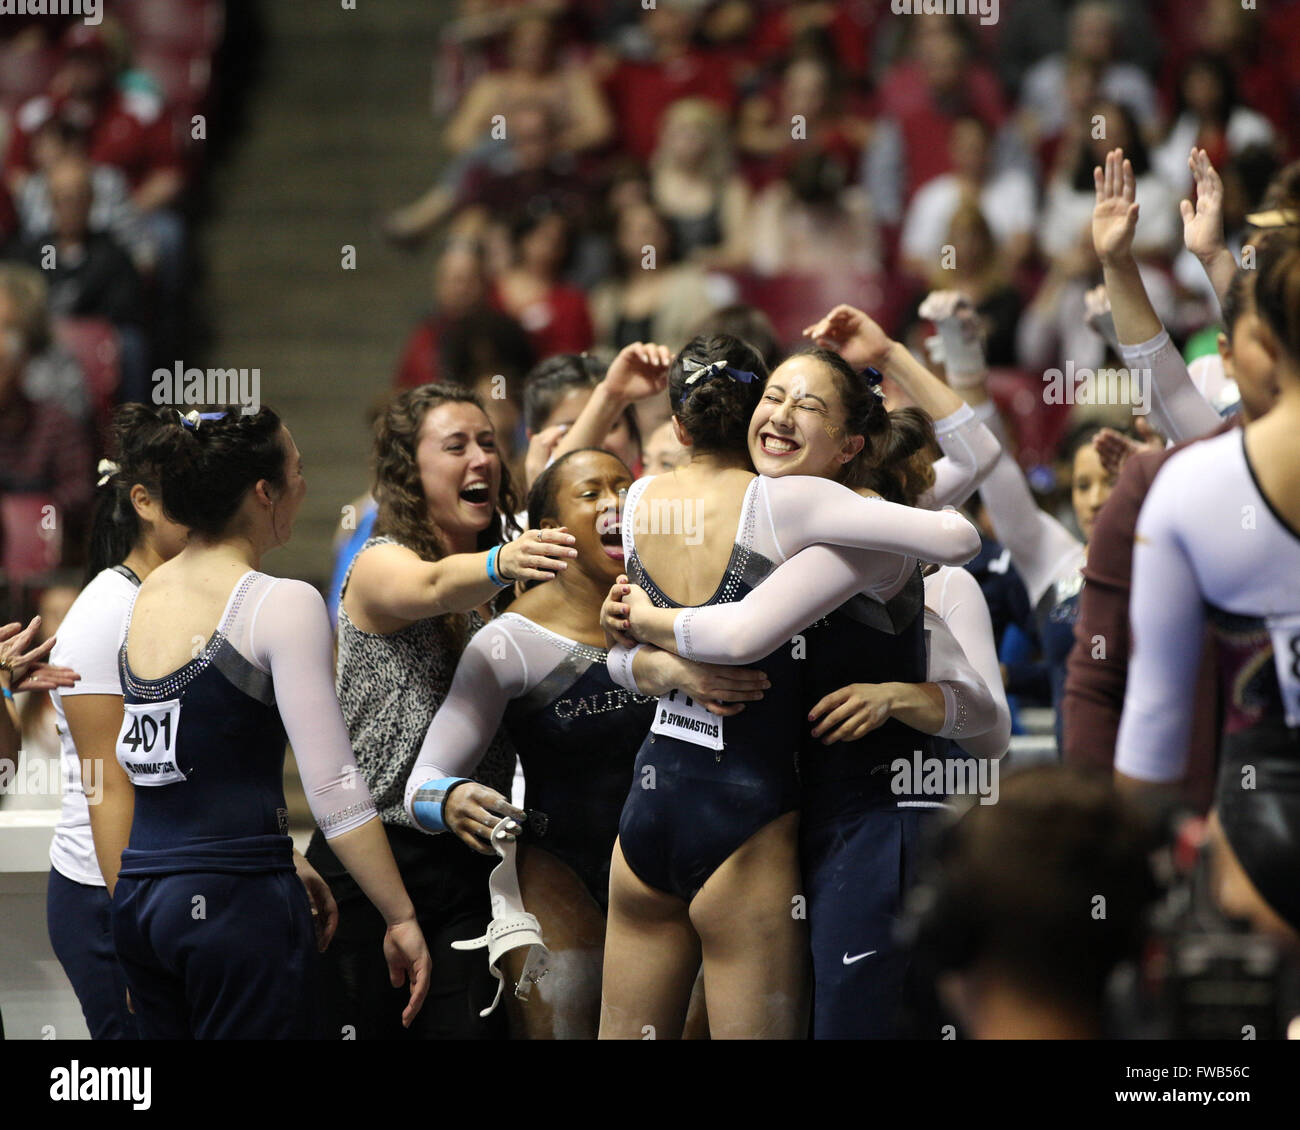 April 2, 2016: The University of California Berkeley gymnastics team celebrates at the NCAA Tuscaloosa Regional gymnastics championship. California pulled out the win, scoring a 195.925 to take second place behind the University of Alabama. The second place finish means California earned a berth at the NCAA Gymnastics Championships in Fort Worth, Texas for the first time since 1992. Melissa J. Perenson/CSM Stock Photo